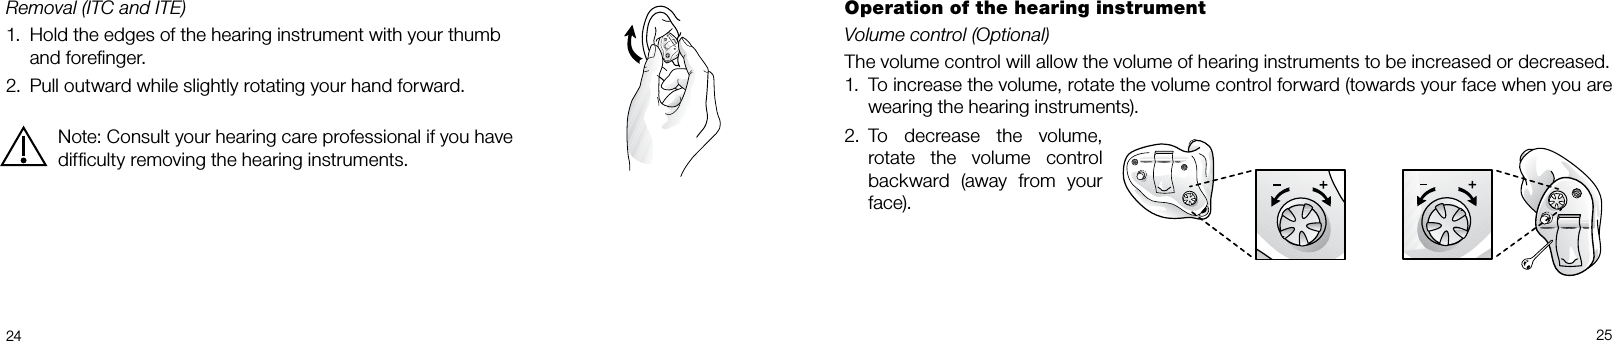  24 25Removal (ITC and ITE)1.  Hold the edges of the hearing instrument with your thumb    and foreﬁnger.2.  Pull outward while slightly rotating your hand forward.Note: Consult your hearing care professional if you have difﬁculty removing the hearing instruments.Operation of the hearing instrumentVolume control (Optional)The volume control will allow the volume of hearing instruments to be increased or decreased. 1.  To increase the volume, rotate the volume control forward (towards your face when you are wearing the hearing instruments).2.  To decrease the volume, rotate the volume control backward (away from your face).